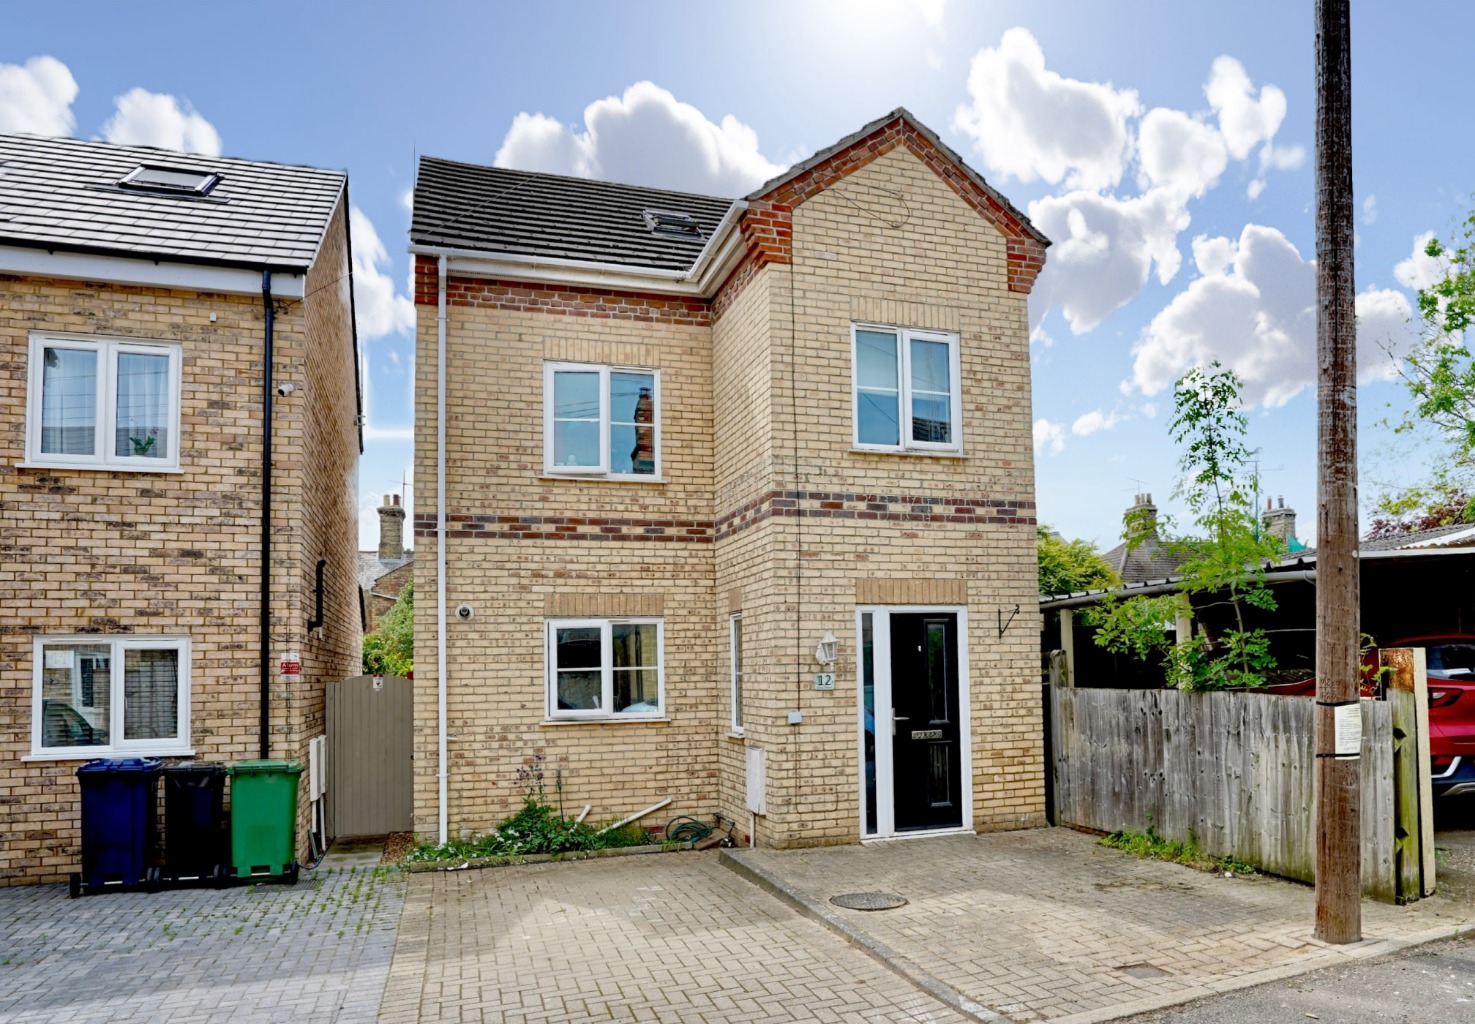 3 bed detached house for sale in Cross Street, Huntingdon - Property Image 1